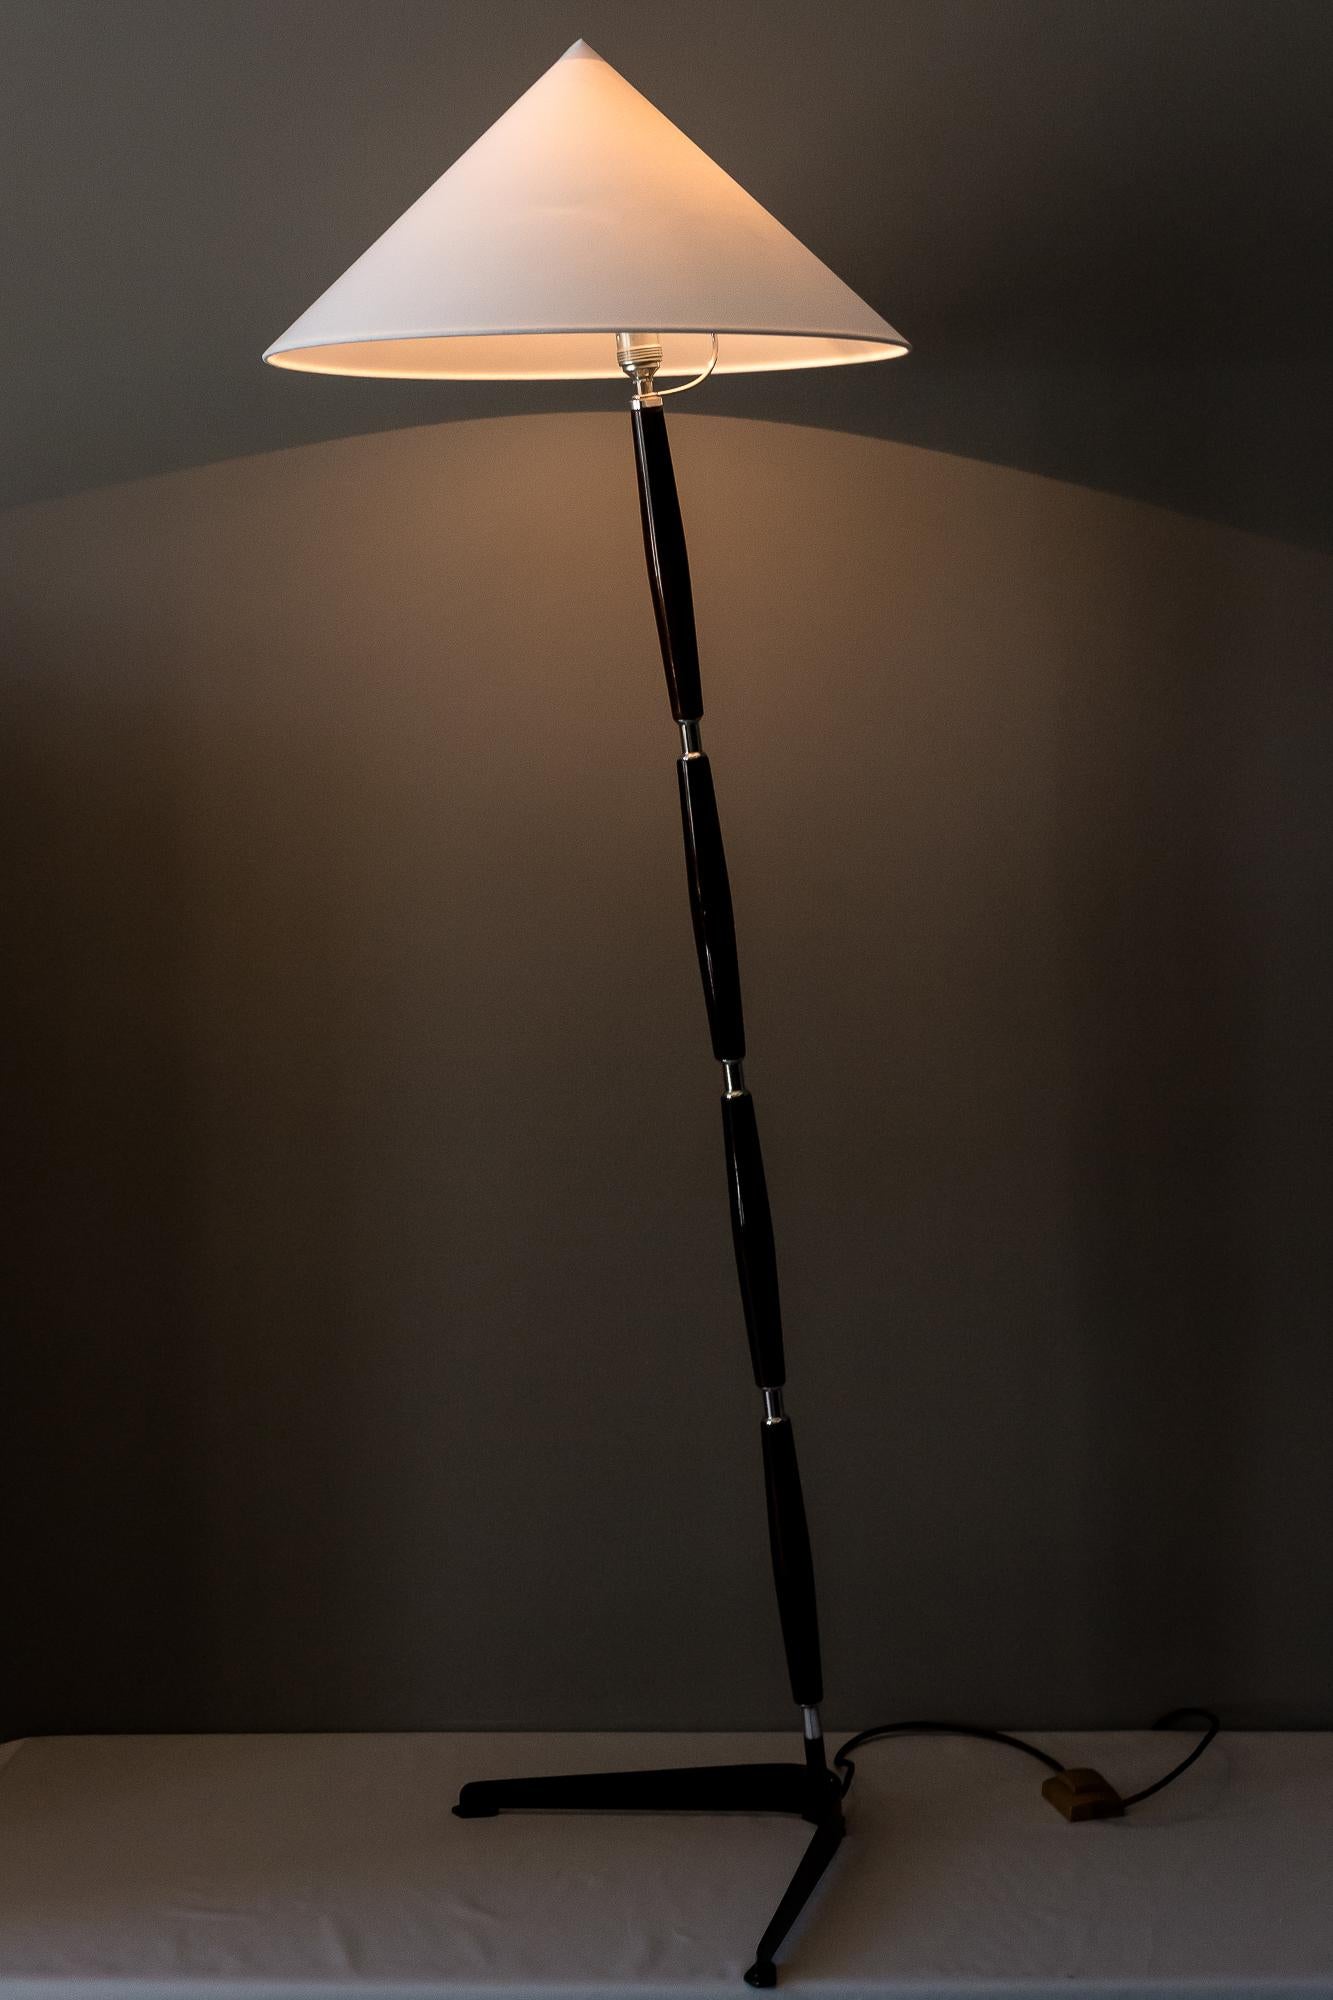 Rupert Nikoll floor lamp, circa 1950s
Iron base
Wood and partly nickel-plated stem
The shade is replaced (new).